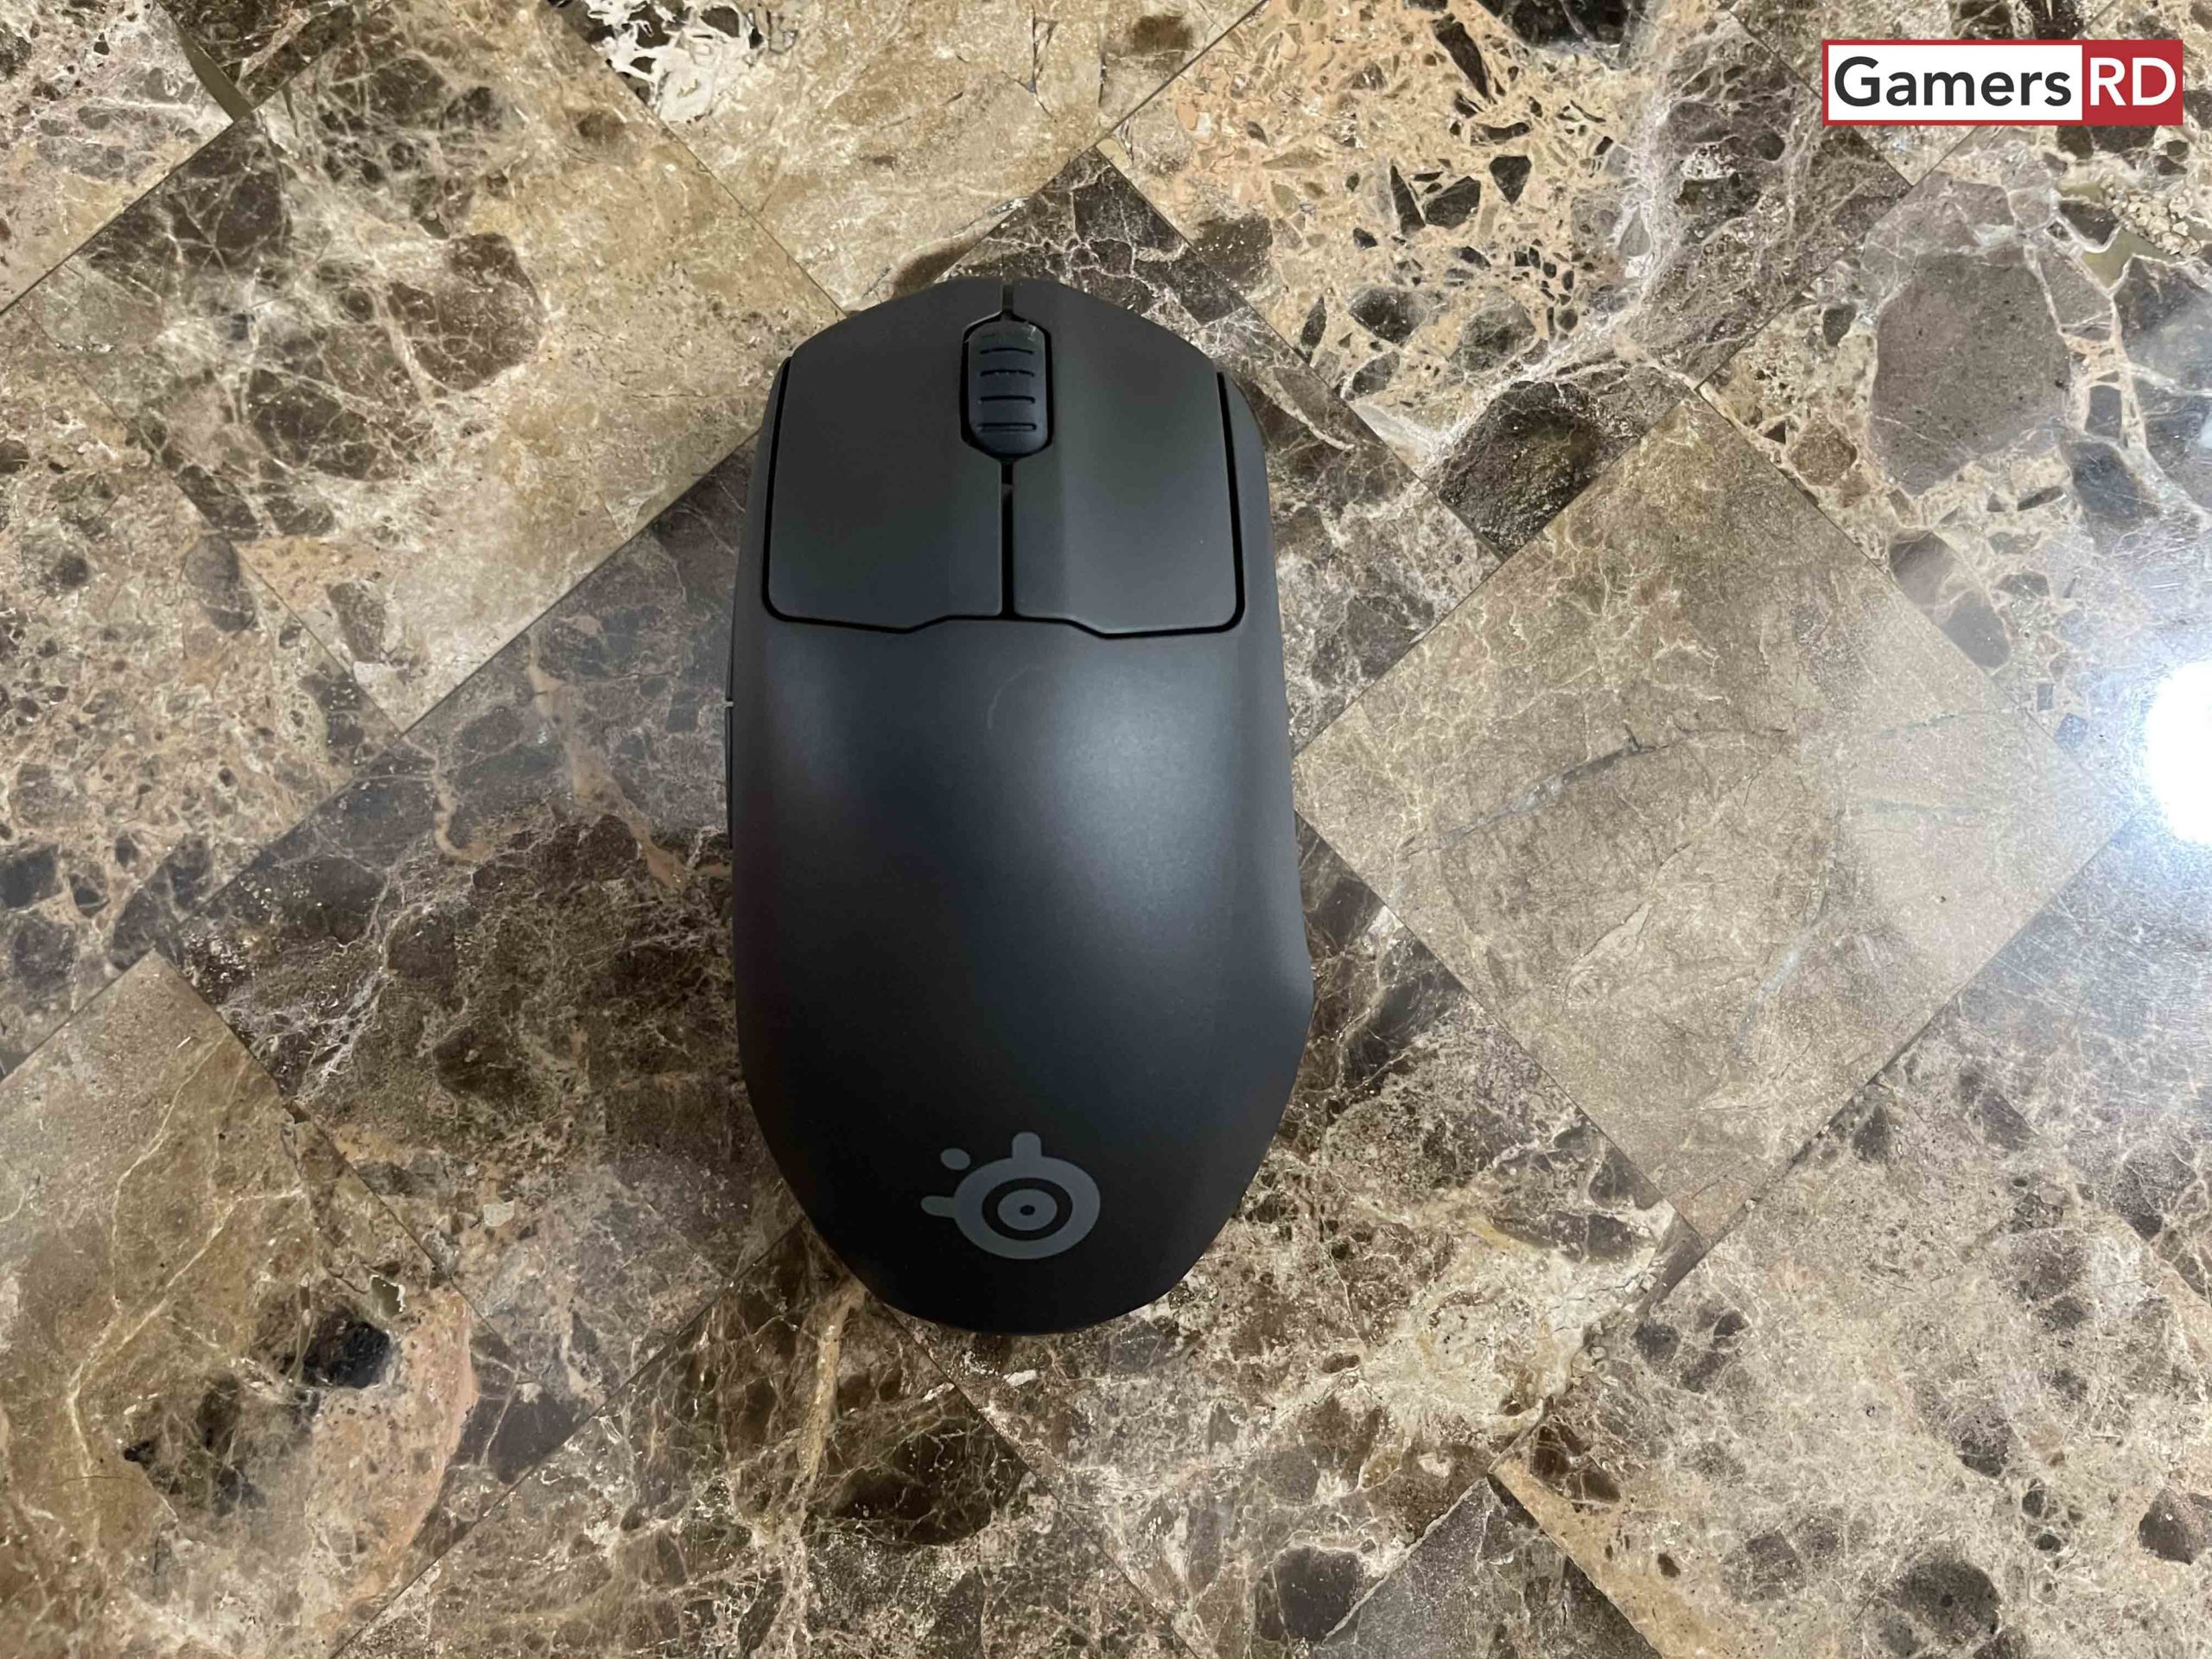 SteelSeries Prime + Gaming Mouse 1 Review